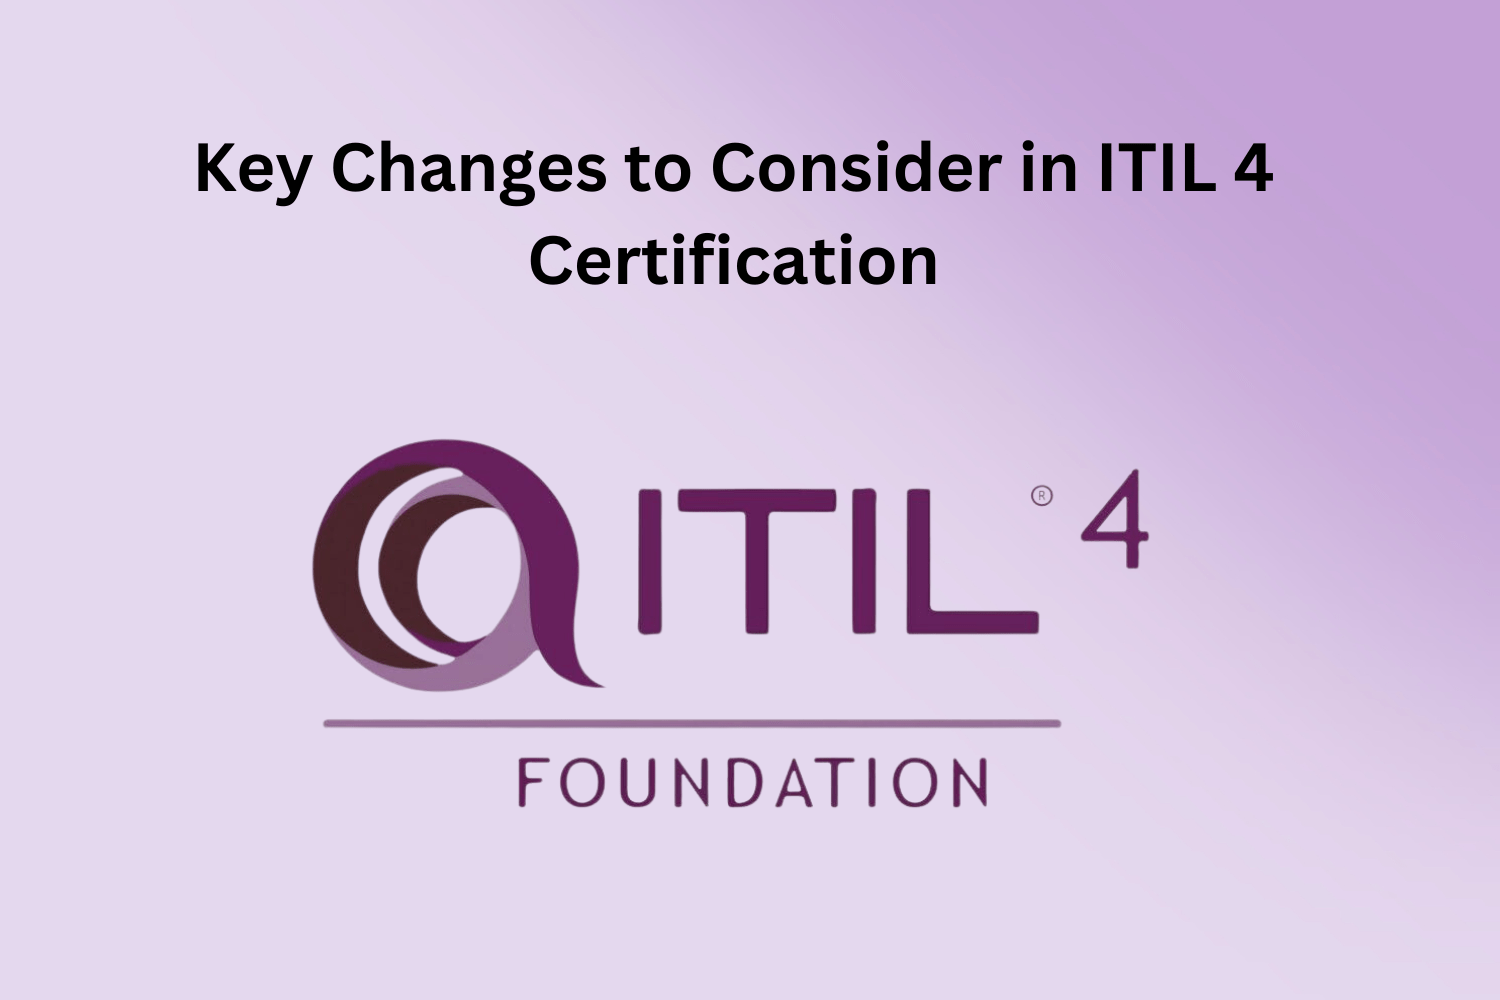 Key Changes to Consider in ITIL 4 Certification